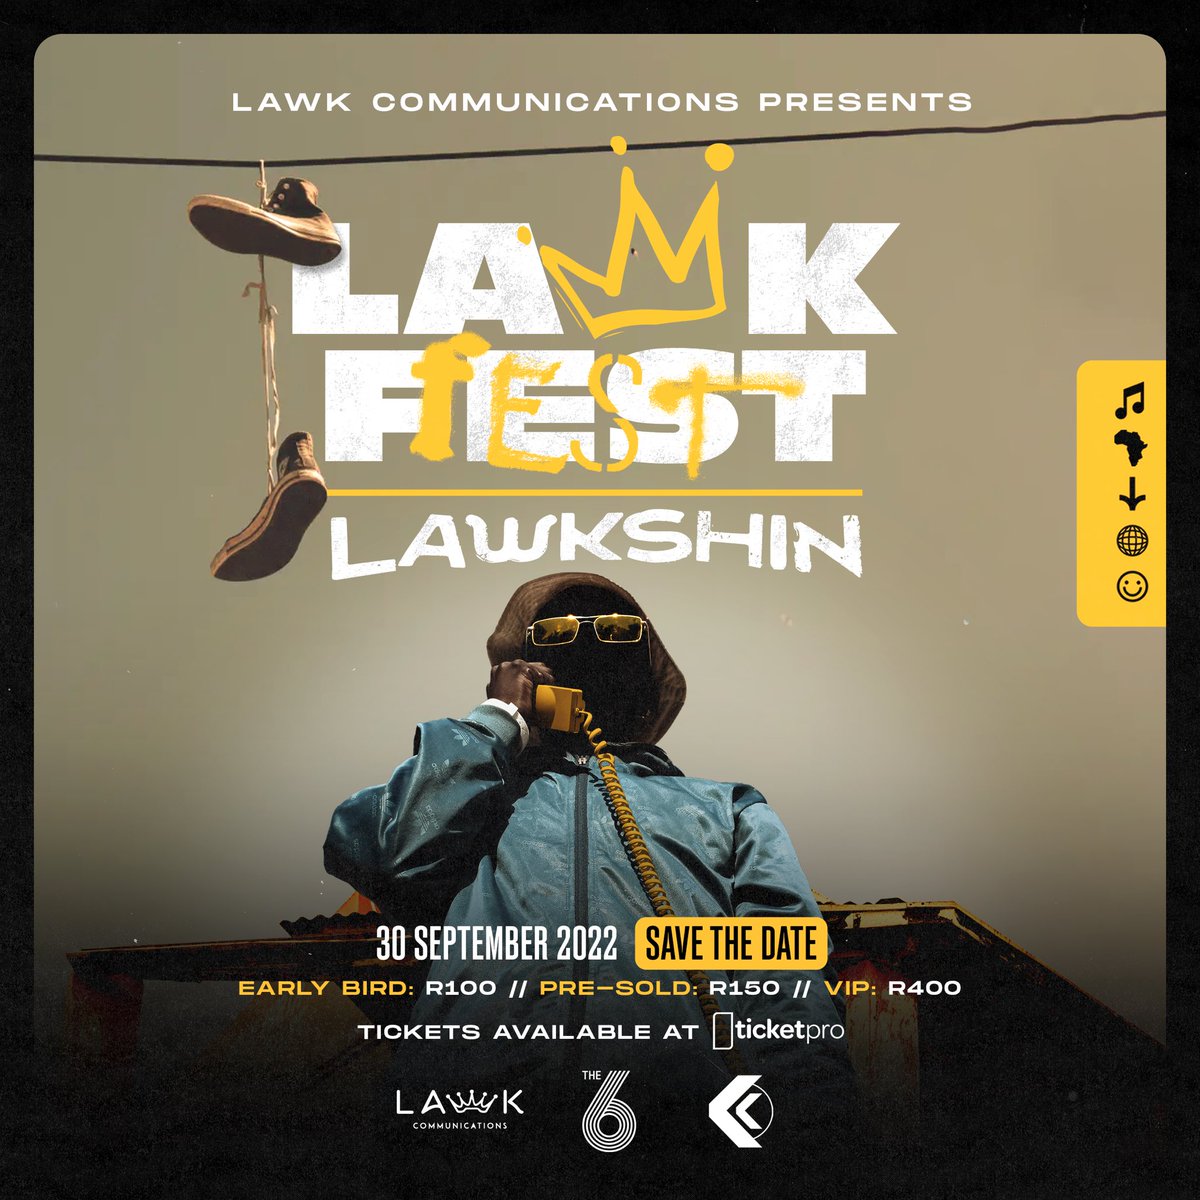 Save the date‼️30th of September Lawk fest returns. Get your tickets cause we taking it to the top🚀🚀🚀 #lawkcommunications #lawk #artist #lawkfest